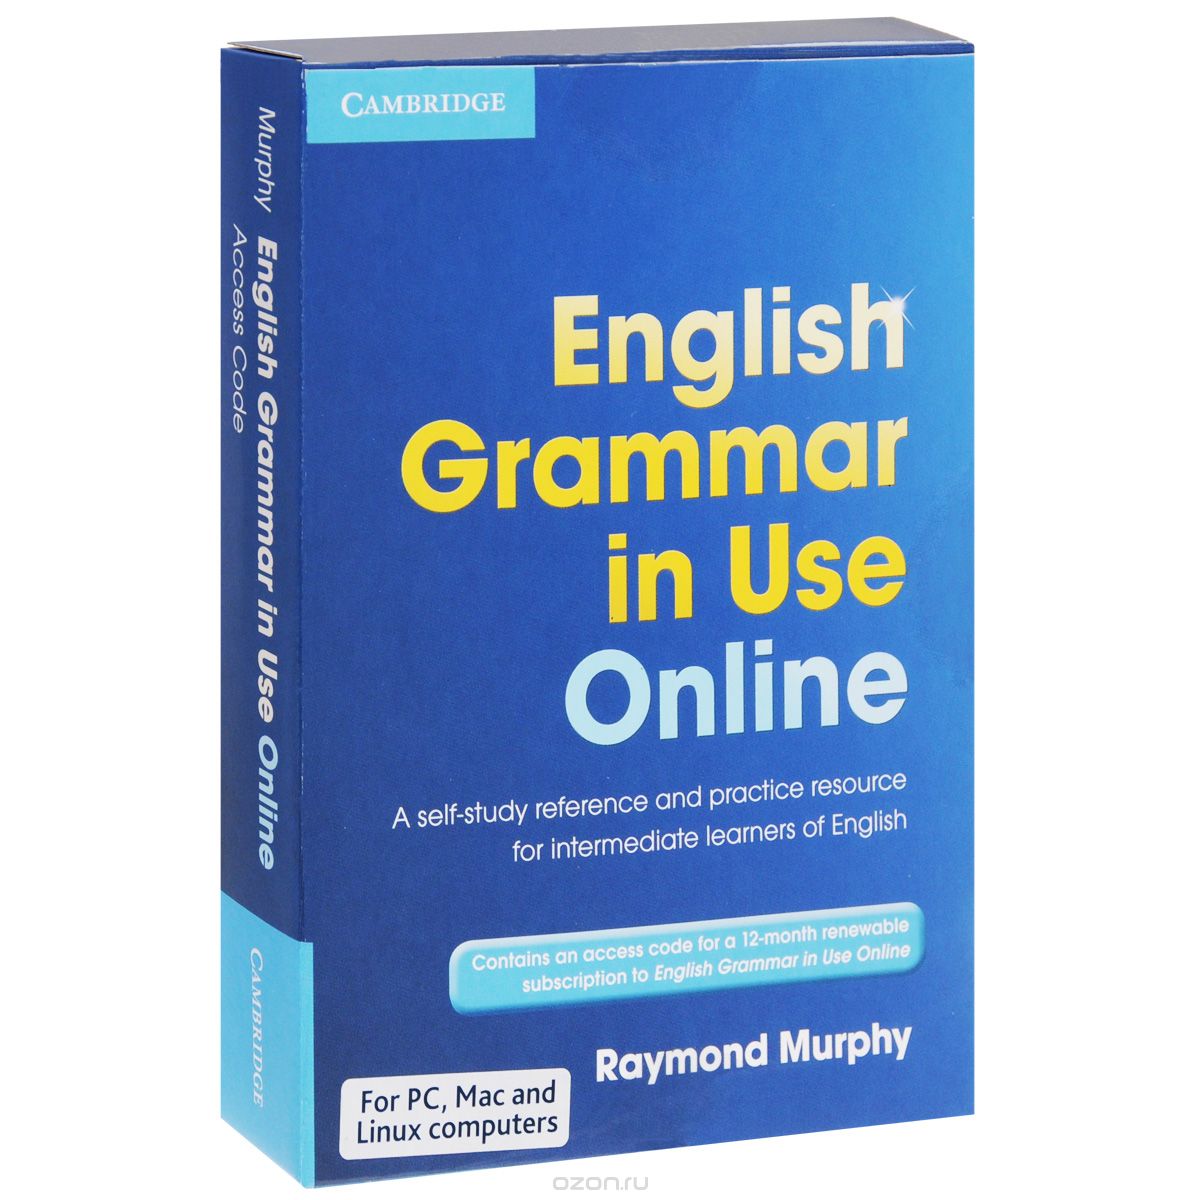 Access Code Card: English Grammar in Use Online: Access Code: A Self-Study Reference And Practice Resource for Intermediate Learners of English